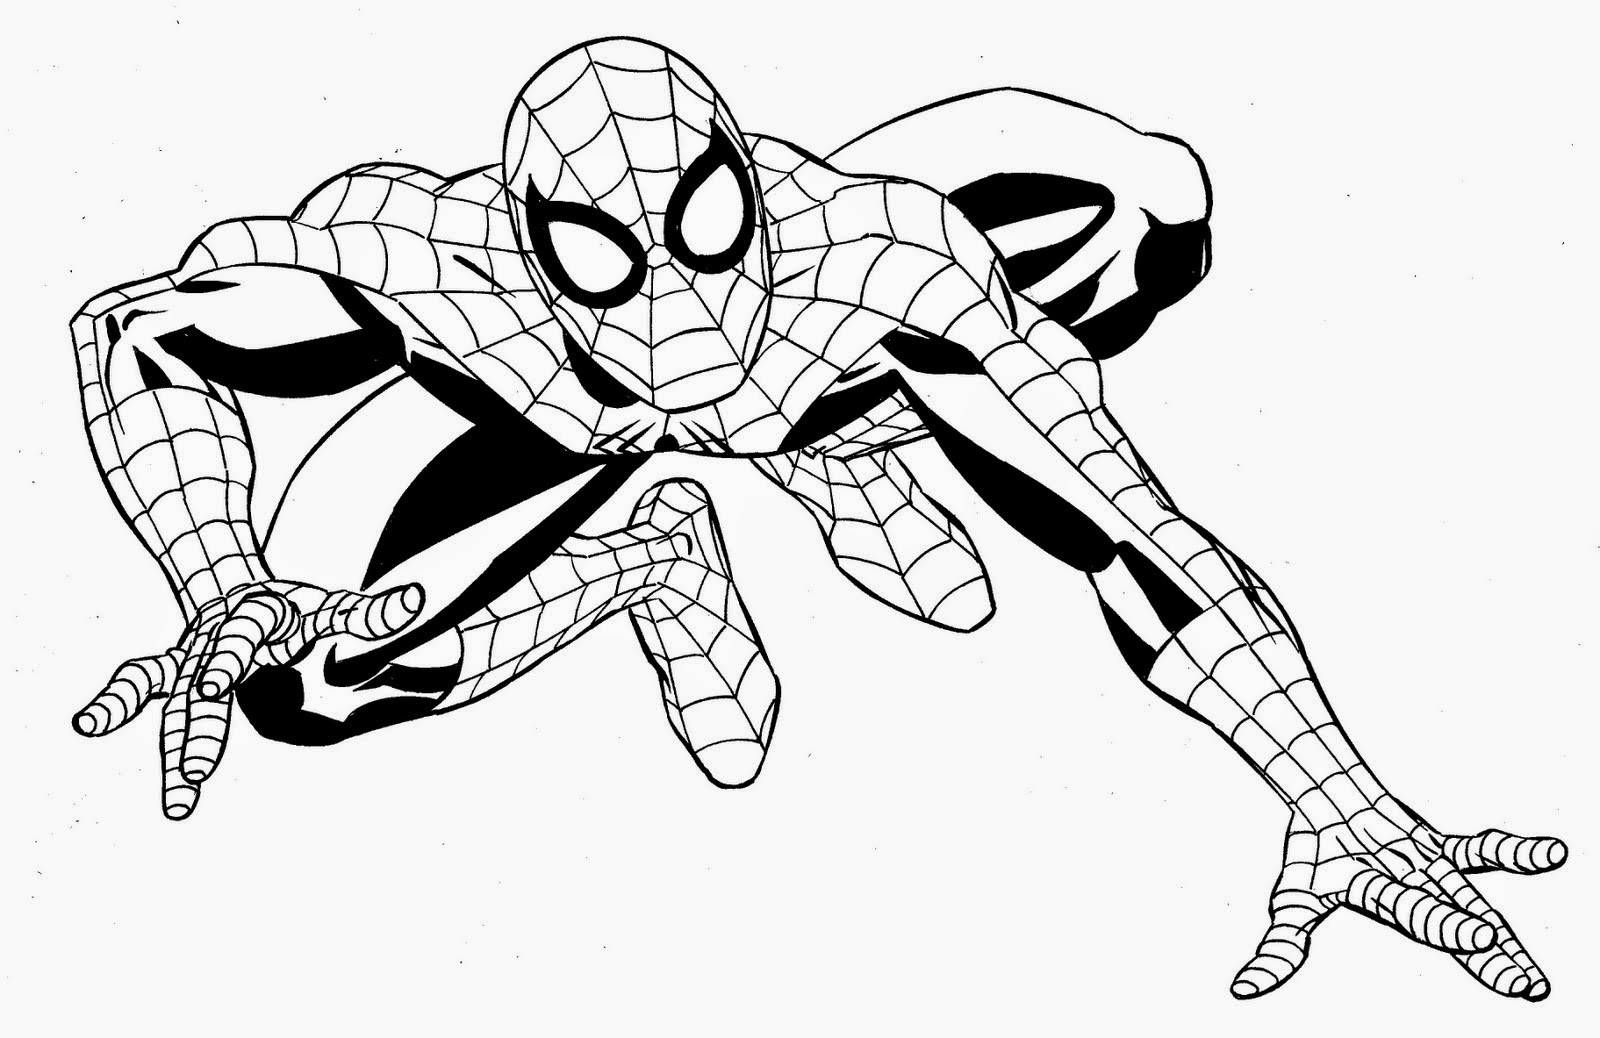 Free Superhero Coloring Pages For Boys Printable
 Coloring Pages Superhero Coloring Pages Free and Printable